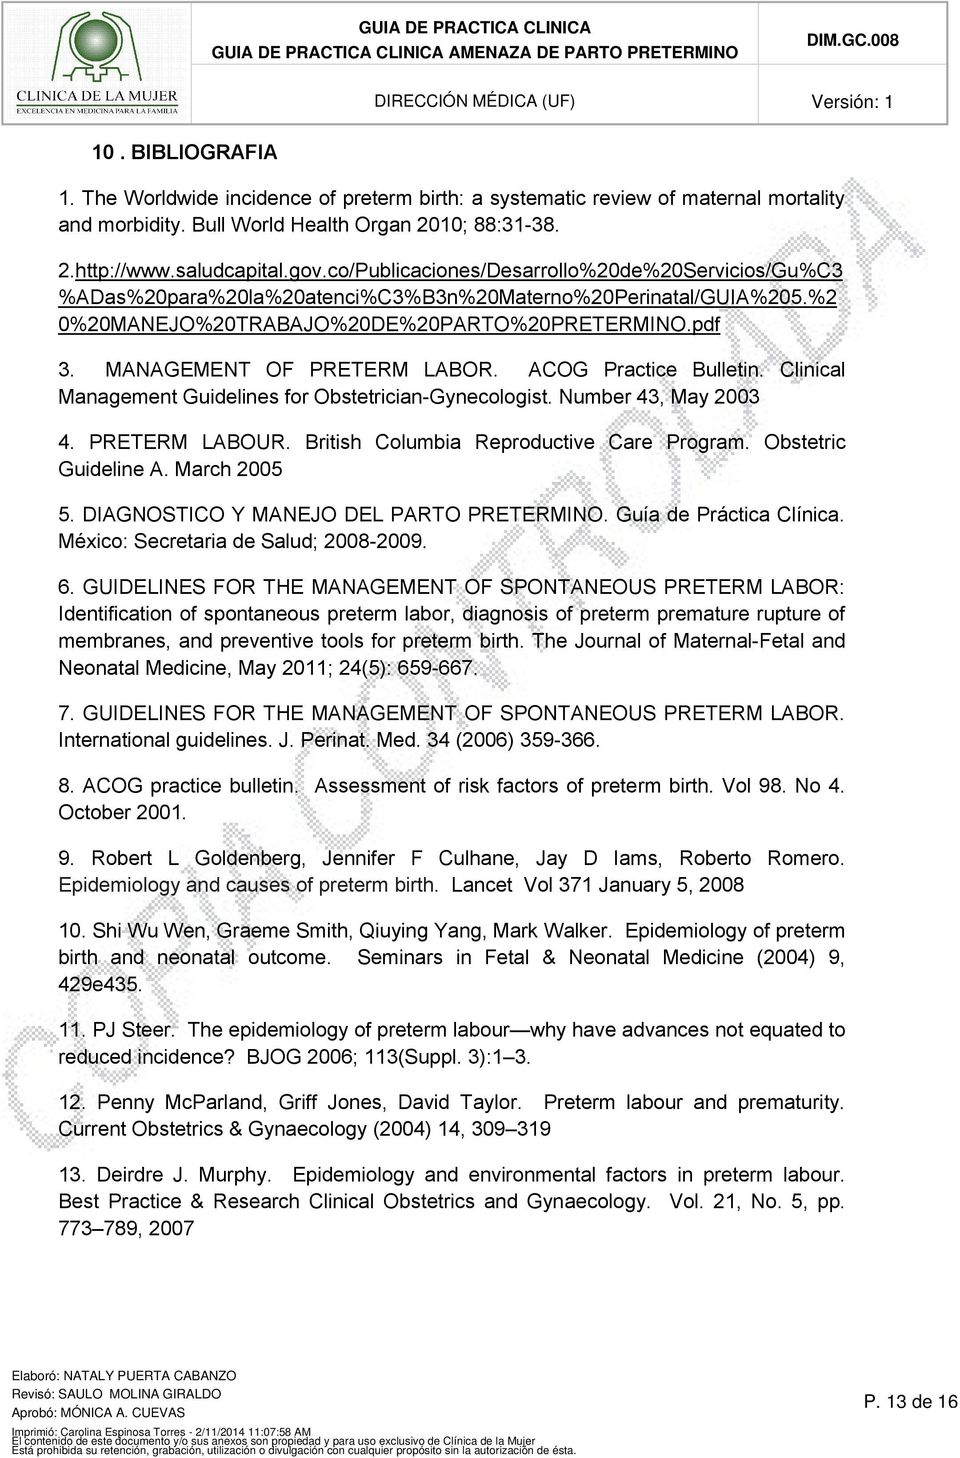 MANAGEMENT OF PRETERM LABOR. ACOG Practice Bulletin. Clinical Management Guidelines for Obstetrician-Gynecologist. Number 43, May 2003 4. PRETERM LABOUR. British Columbia Reproductive Care Program.